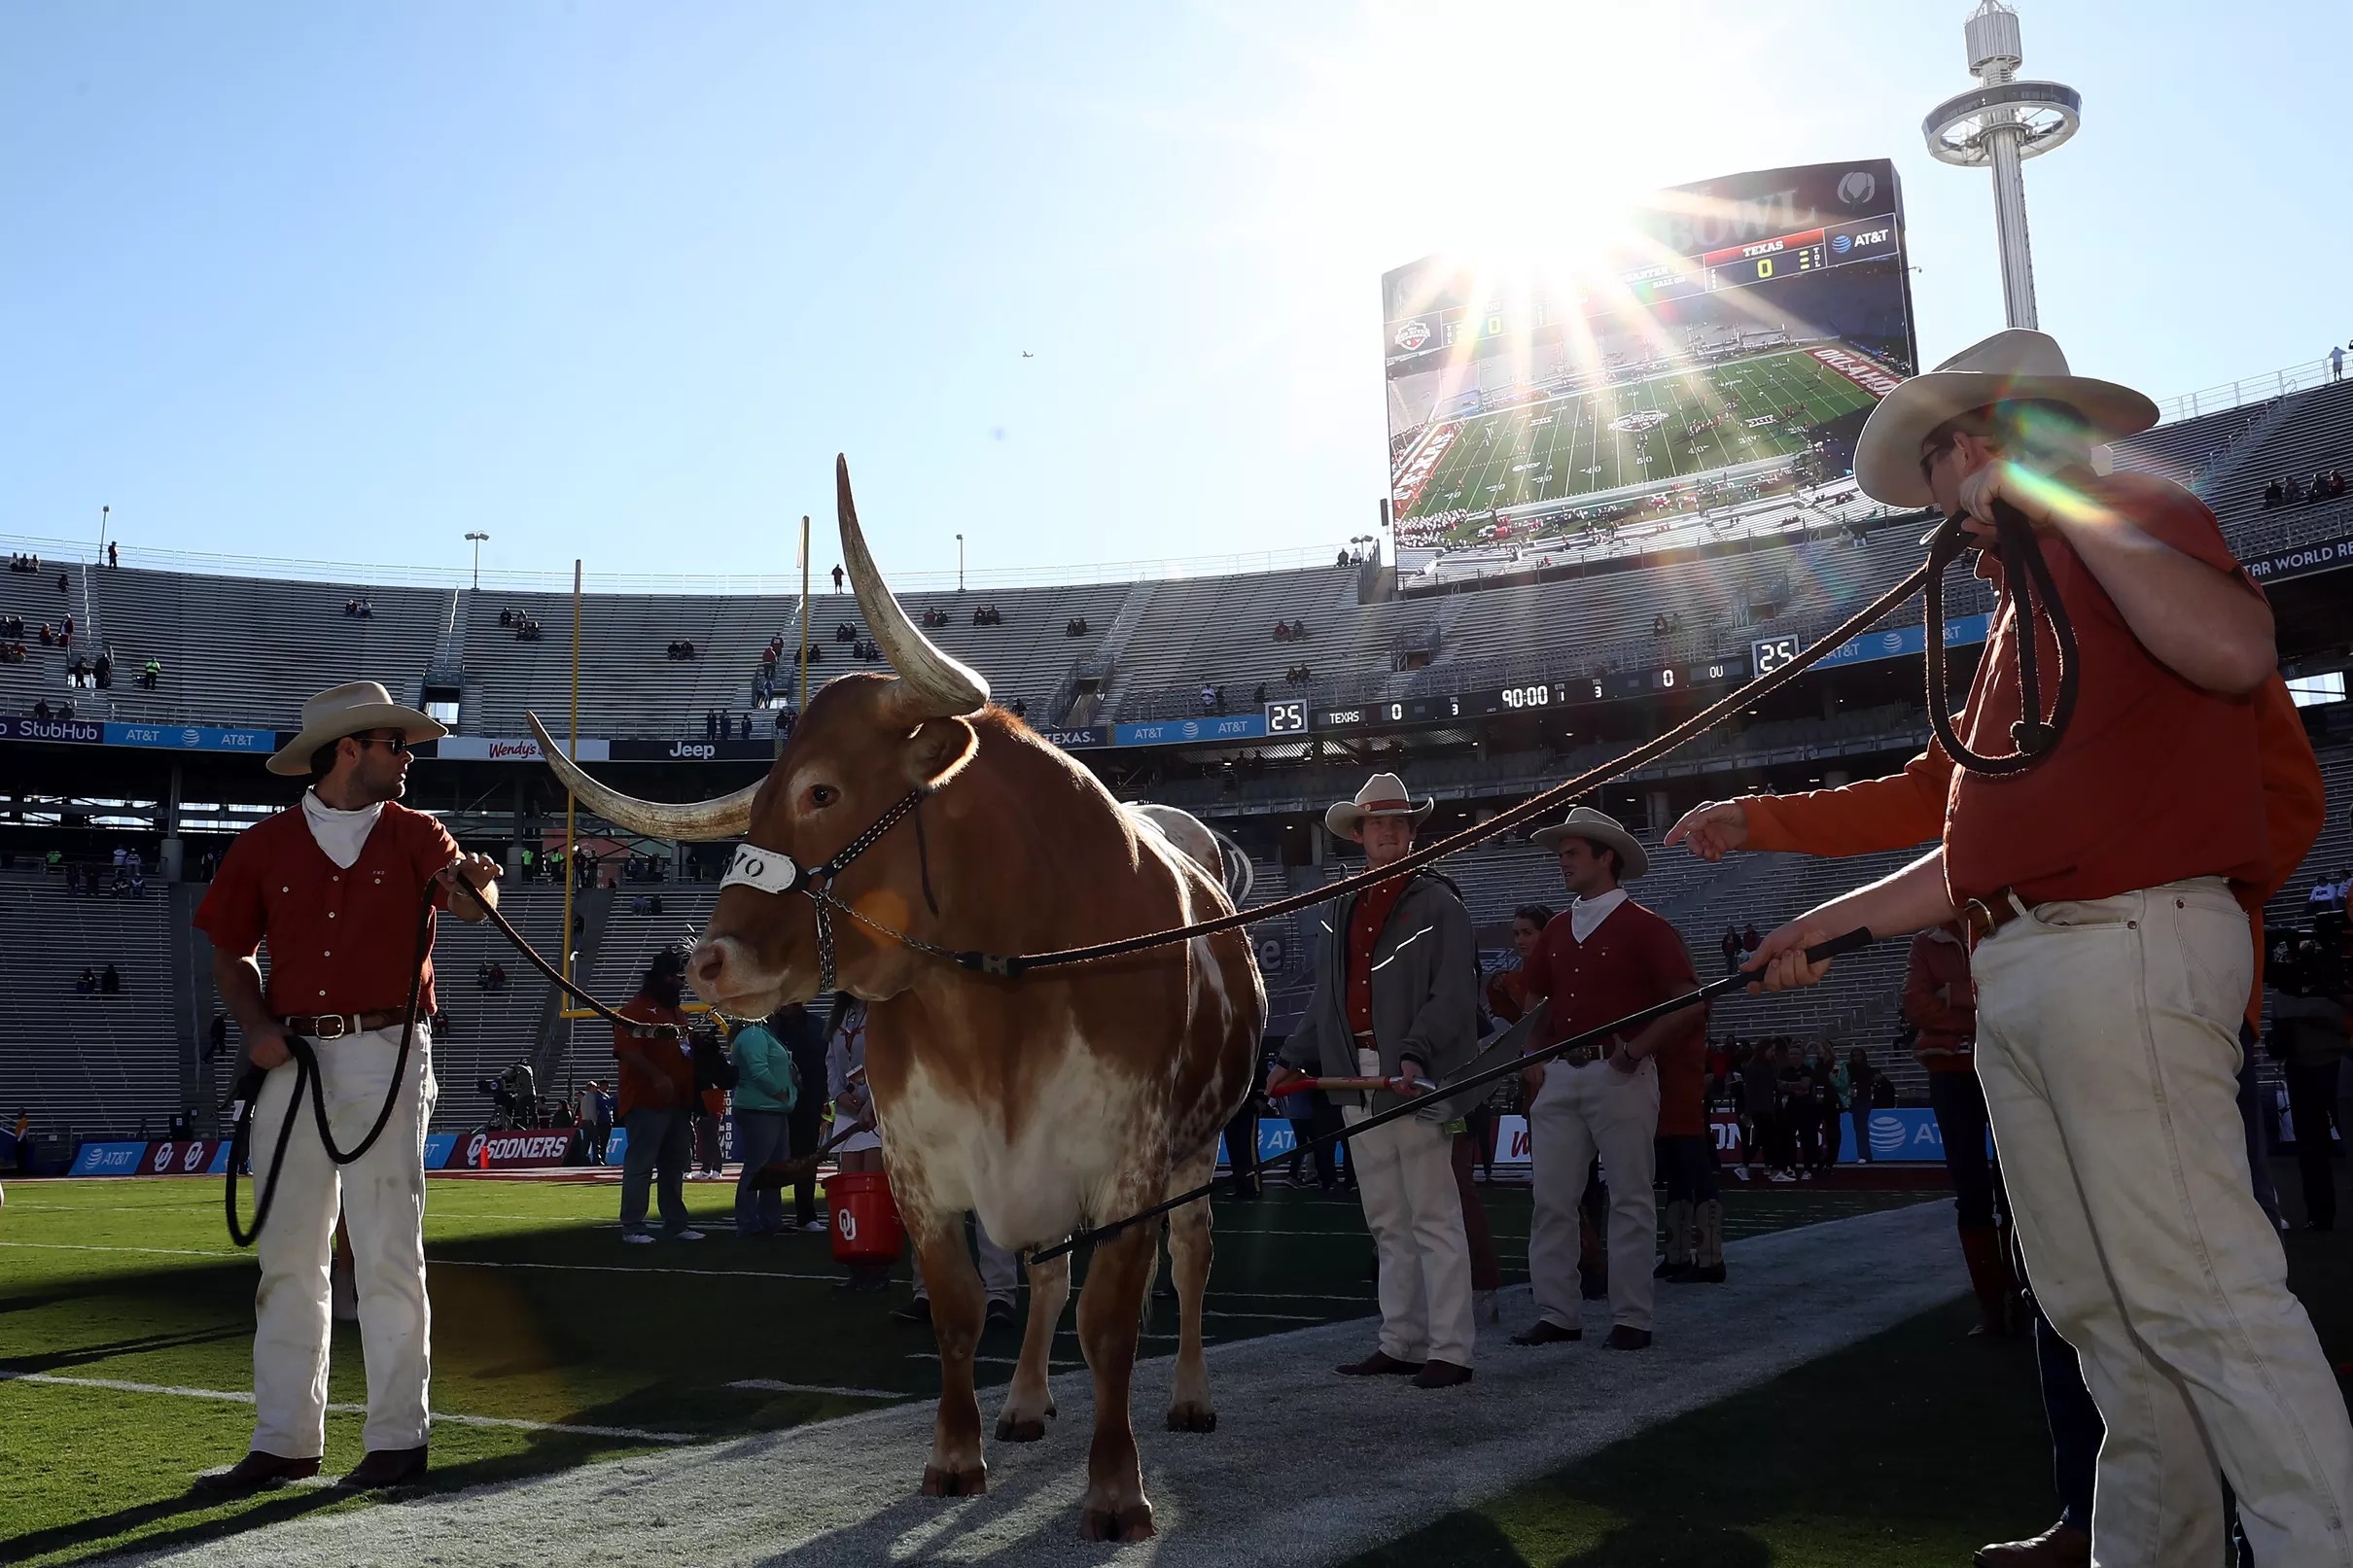 Watch Instant analysis of the Red River Showdown